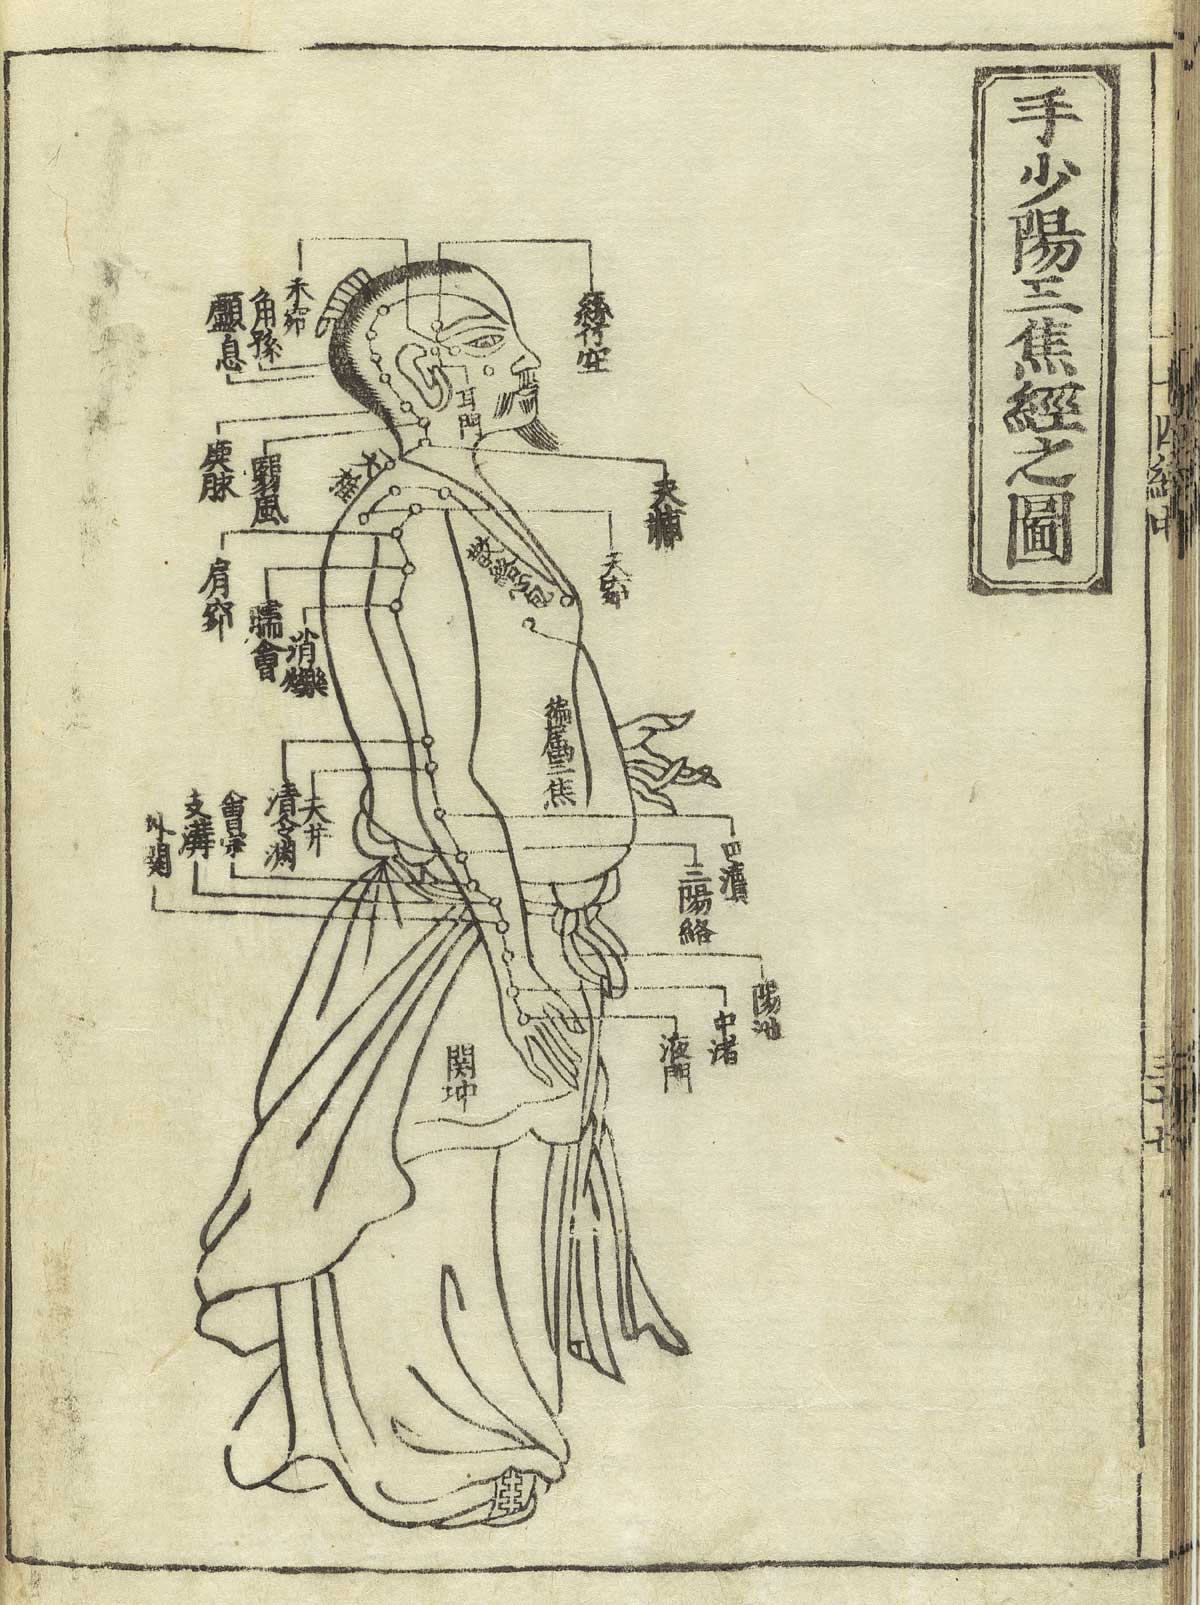 Woodcut showing the Shaoyang sanjiao meridian of hand of a standing male figure in profile wearing a loin cloth with meridians indicated down the arms and chest with Chinese characters giving names of the points, from Hua Shou’s Jushikei hakki, NLM Call no.: WZ 260 H868s 1716.